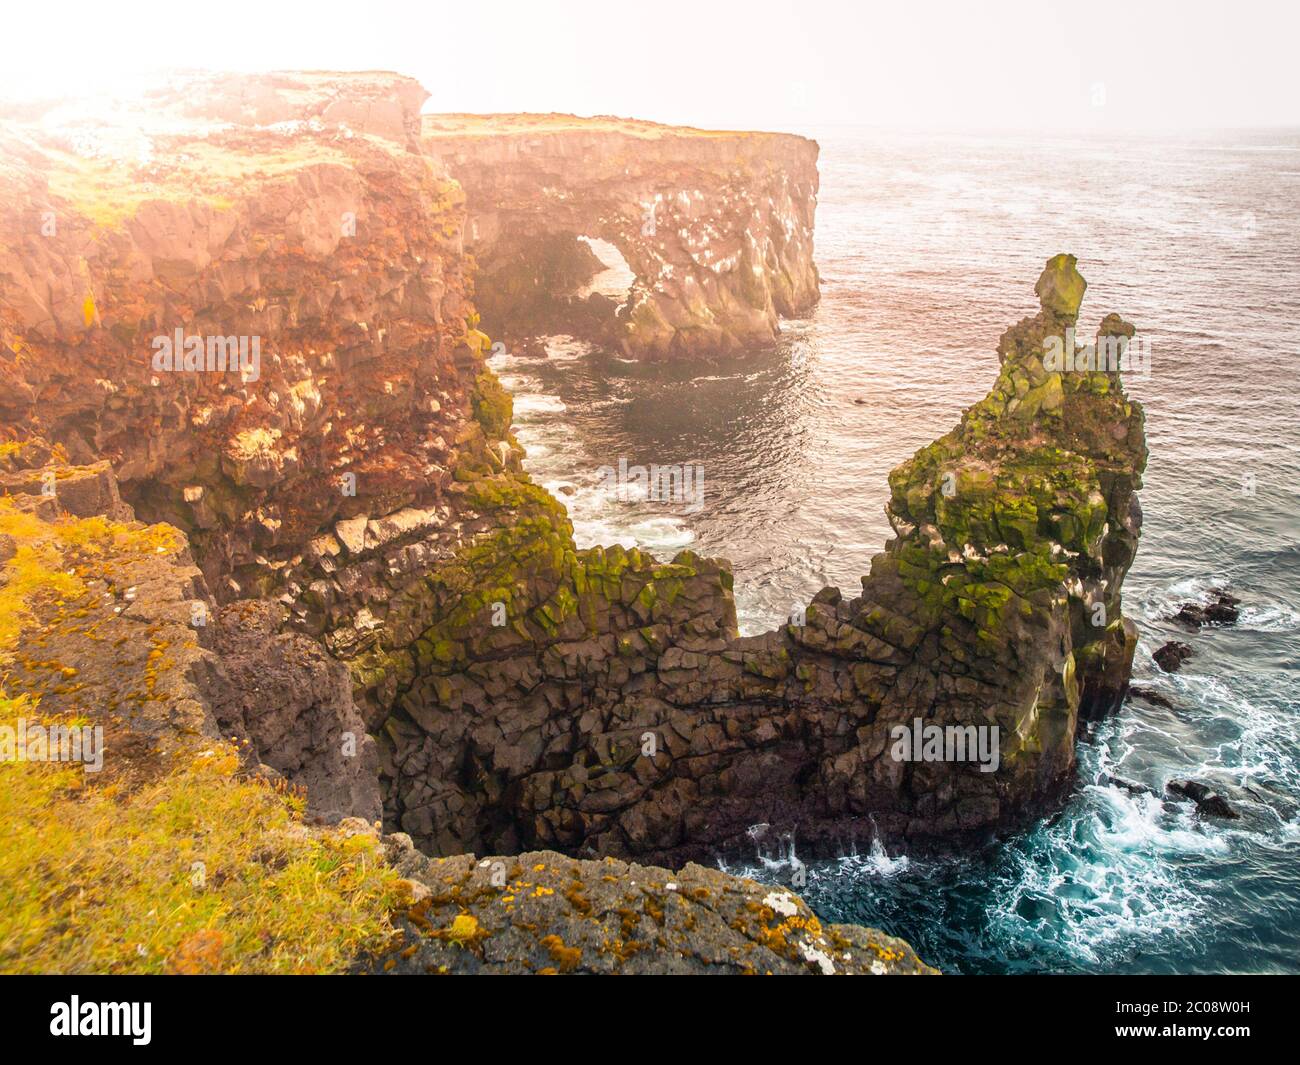 Londrangar, rock lava formation in the sea. Eroded basalt cliffs in the wild sea at coastline on Sneafellsnes peninsula, Iceland. Stock Photo